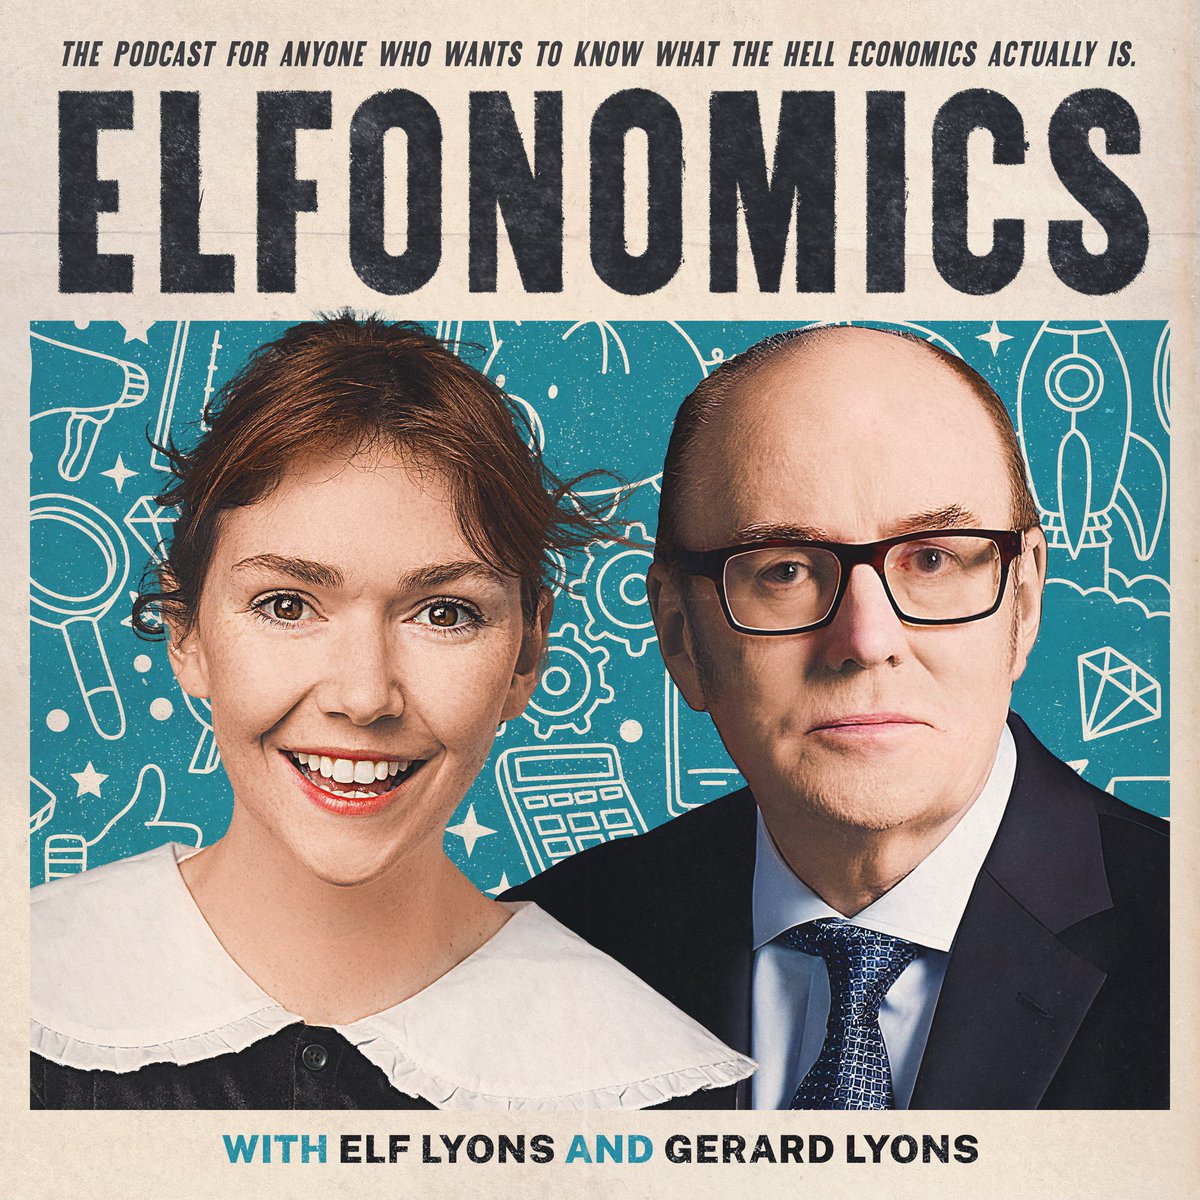 @elf_lyons and I’s podcast @ELFONOMICS is back We’ve got loads of exciting episodes coming out soon, covering the economics of weddings, Only Fans and much more Subscribe and give this teaser a listen, where we talk about the end of cheap money podcasts.apple.com/us/podcast/elf…